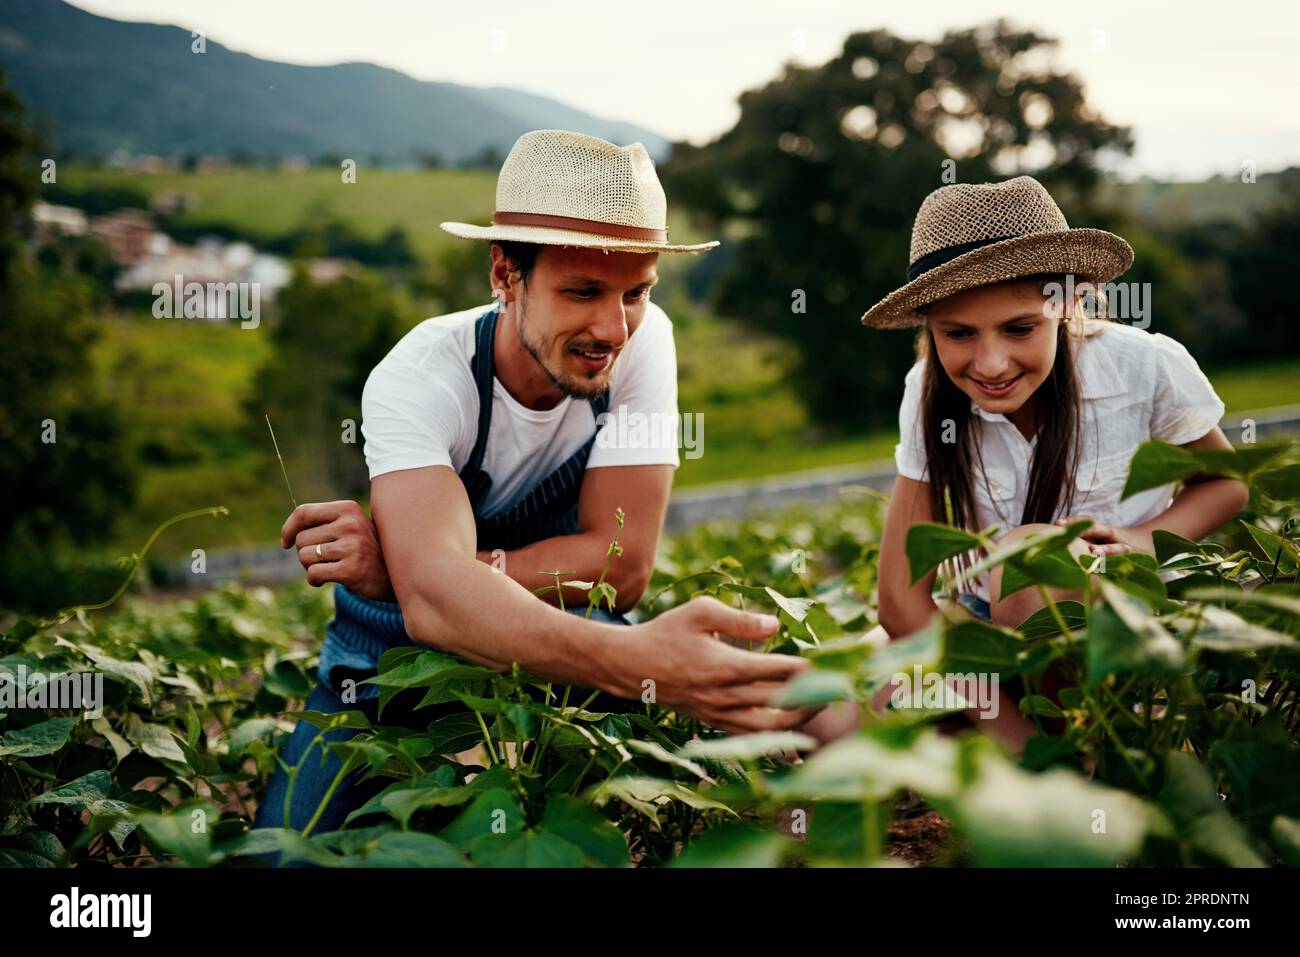 Passing down his wealth of farming knowledge. Full length shot of a handsome man and his young daughter working the fields on their farm. Stock Photo